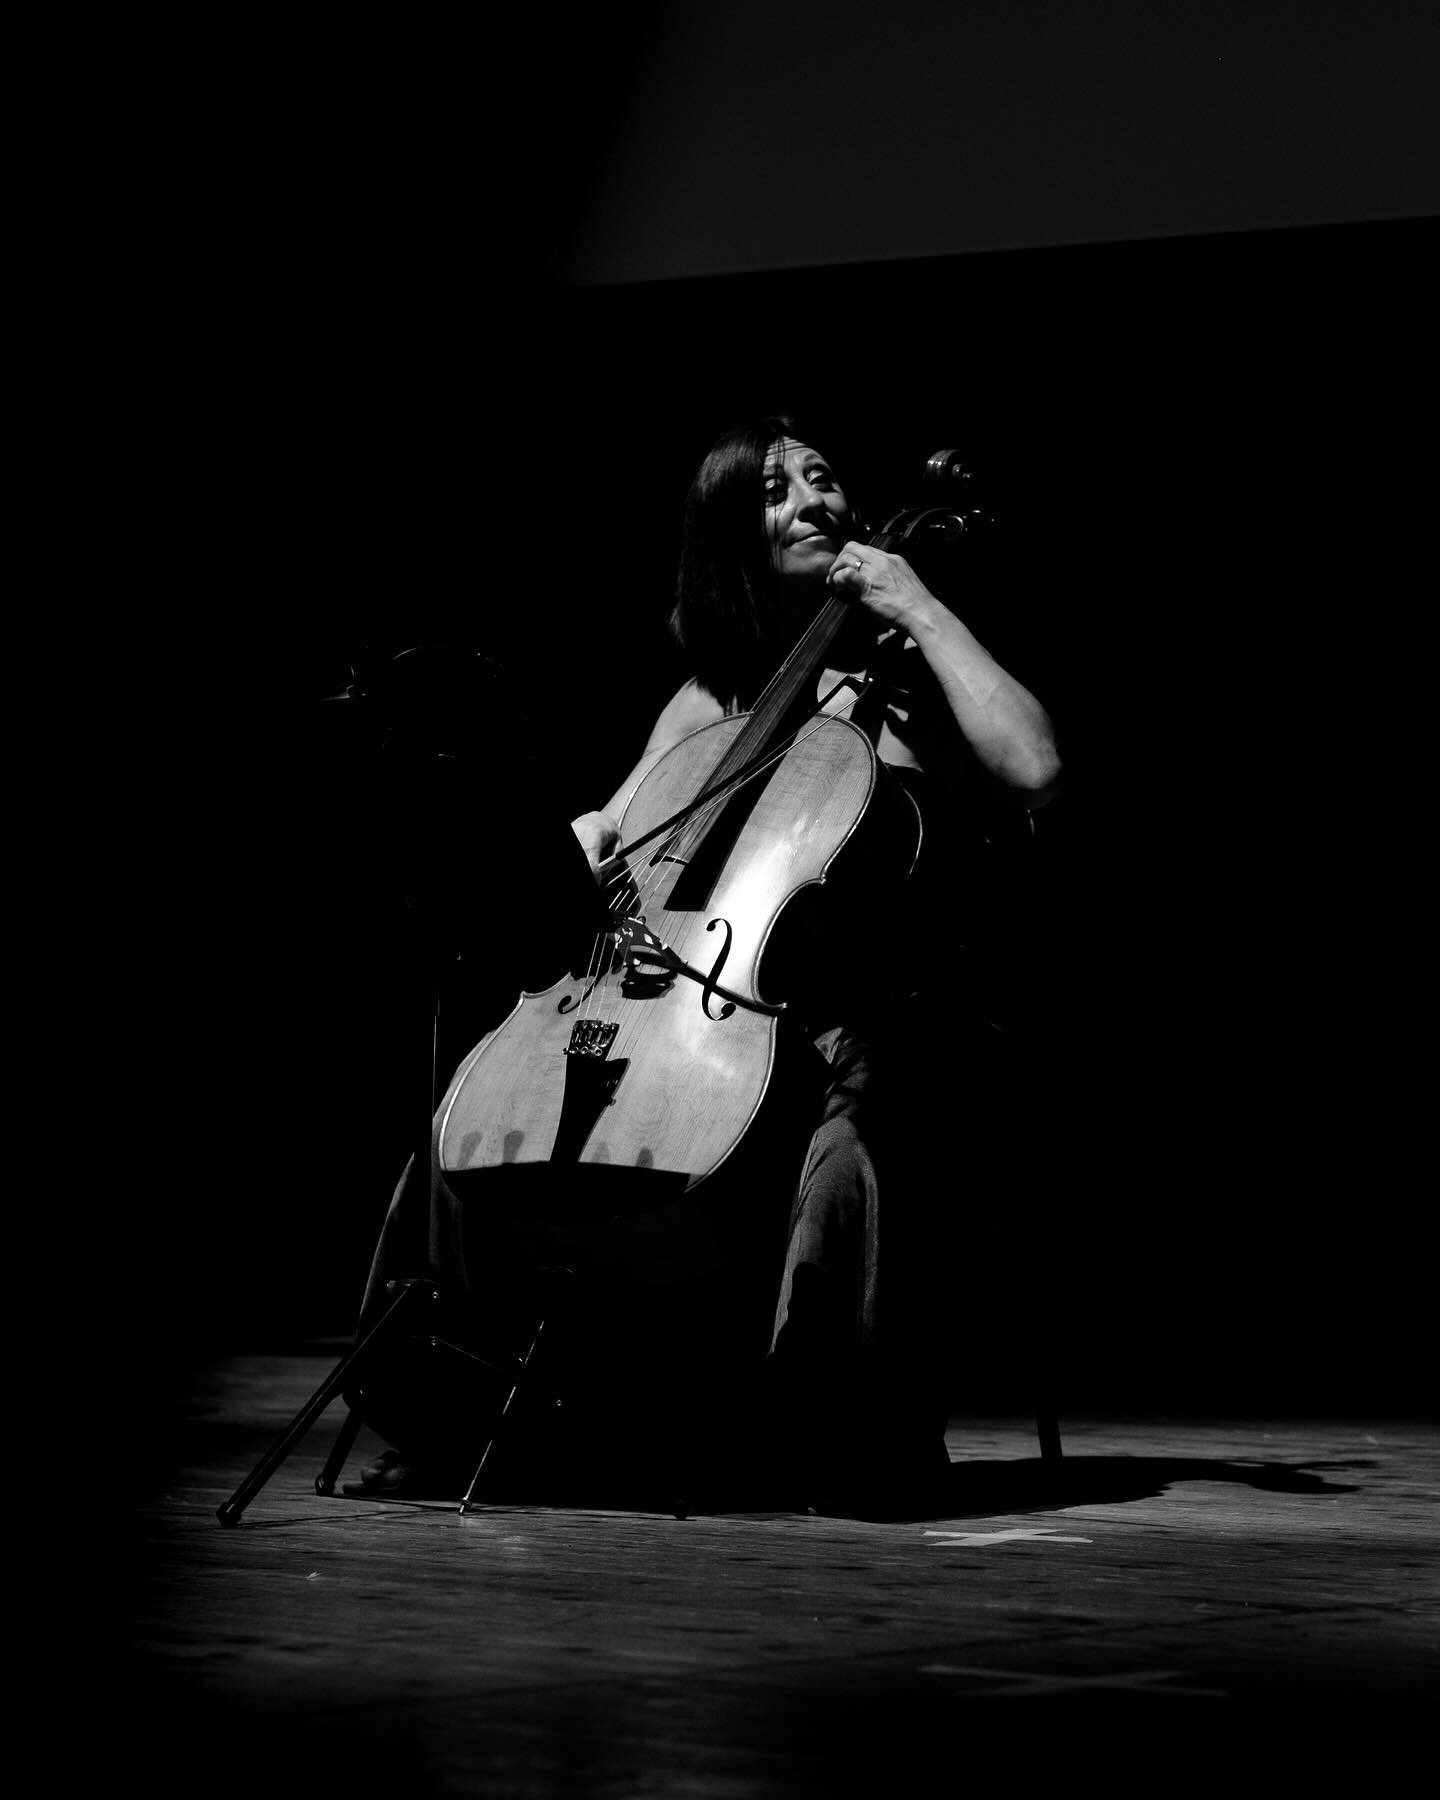 &quot;Soulful melodies echoing through the grayscale depths of passion and emotion.&quot;

Dallo spettacolo &ldquo;comunicaz10n1&rdquo; ideato dall&rsquo; @ass.culturale.valle.camonica .
Ph @stefano.freti 

#violoncellista #musiclover 
#musicalovers
